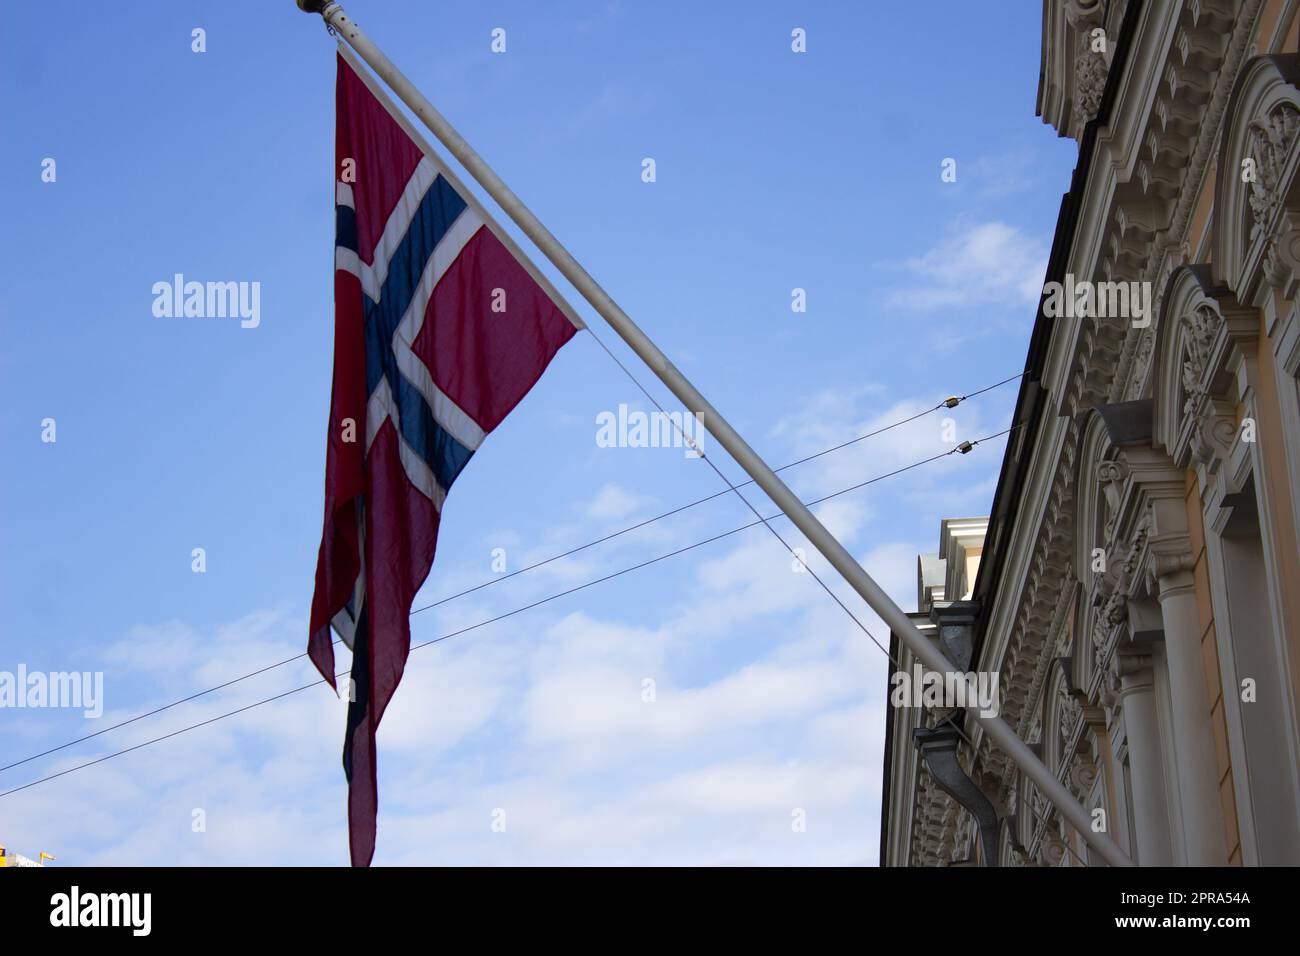 The national flag of Norway is seen above the embassy of the Kingdom of Norway in Moscow. Russia has made a decision to expel ten diplomats from Norway's Moscow embassy, according to the Russian Foreign Ministry. The decision followed the announcement on April 13 2023 that the Norwegian authorities had expelled 15 Russian embassy officials. Stock Photo